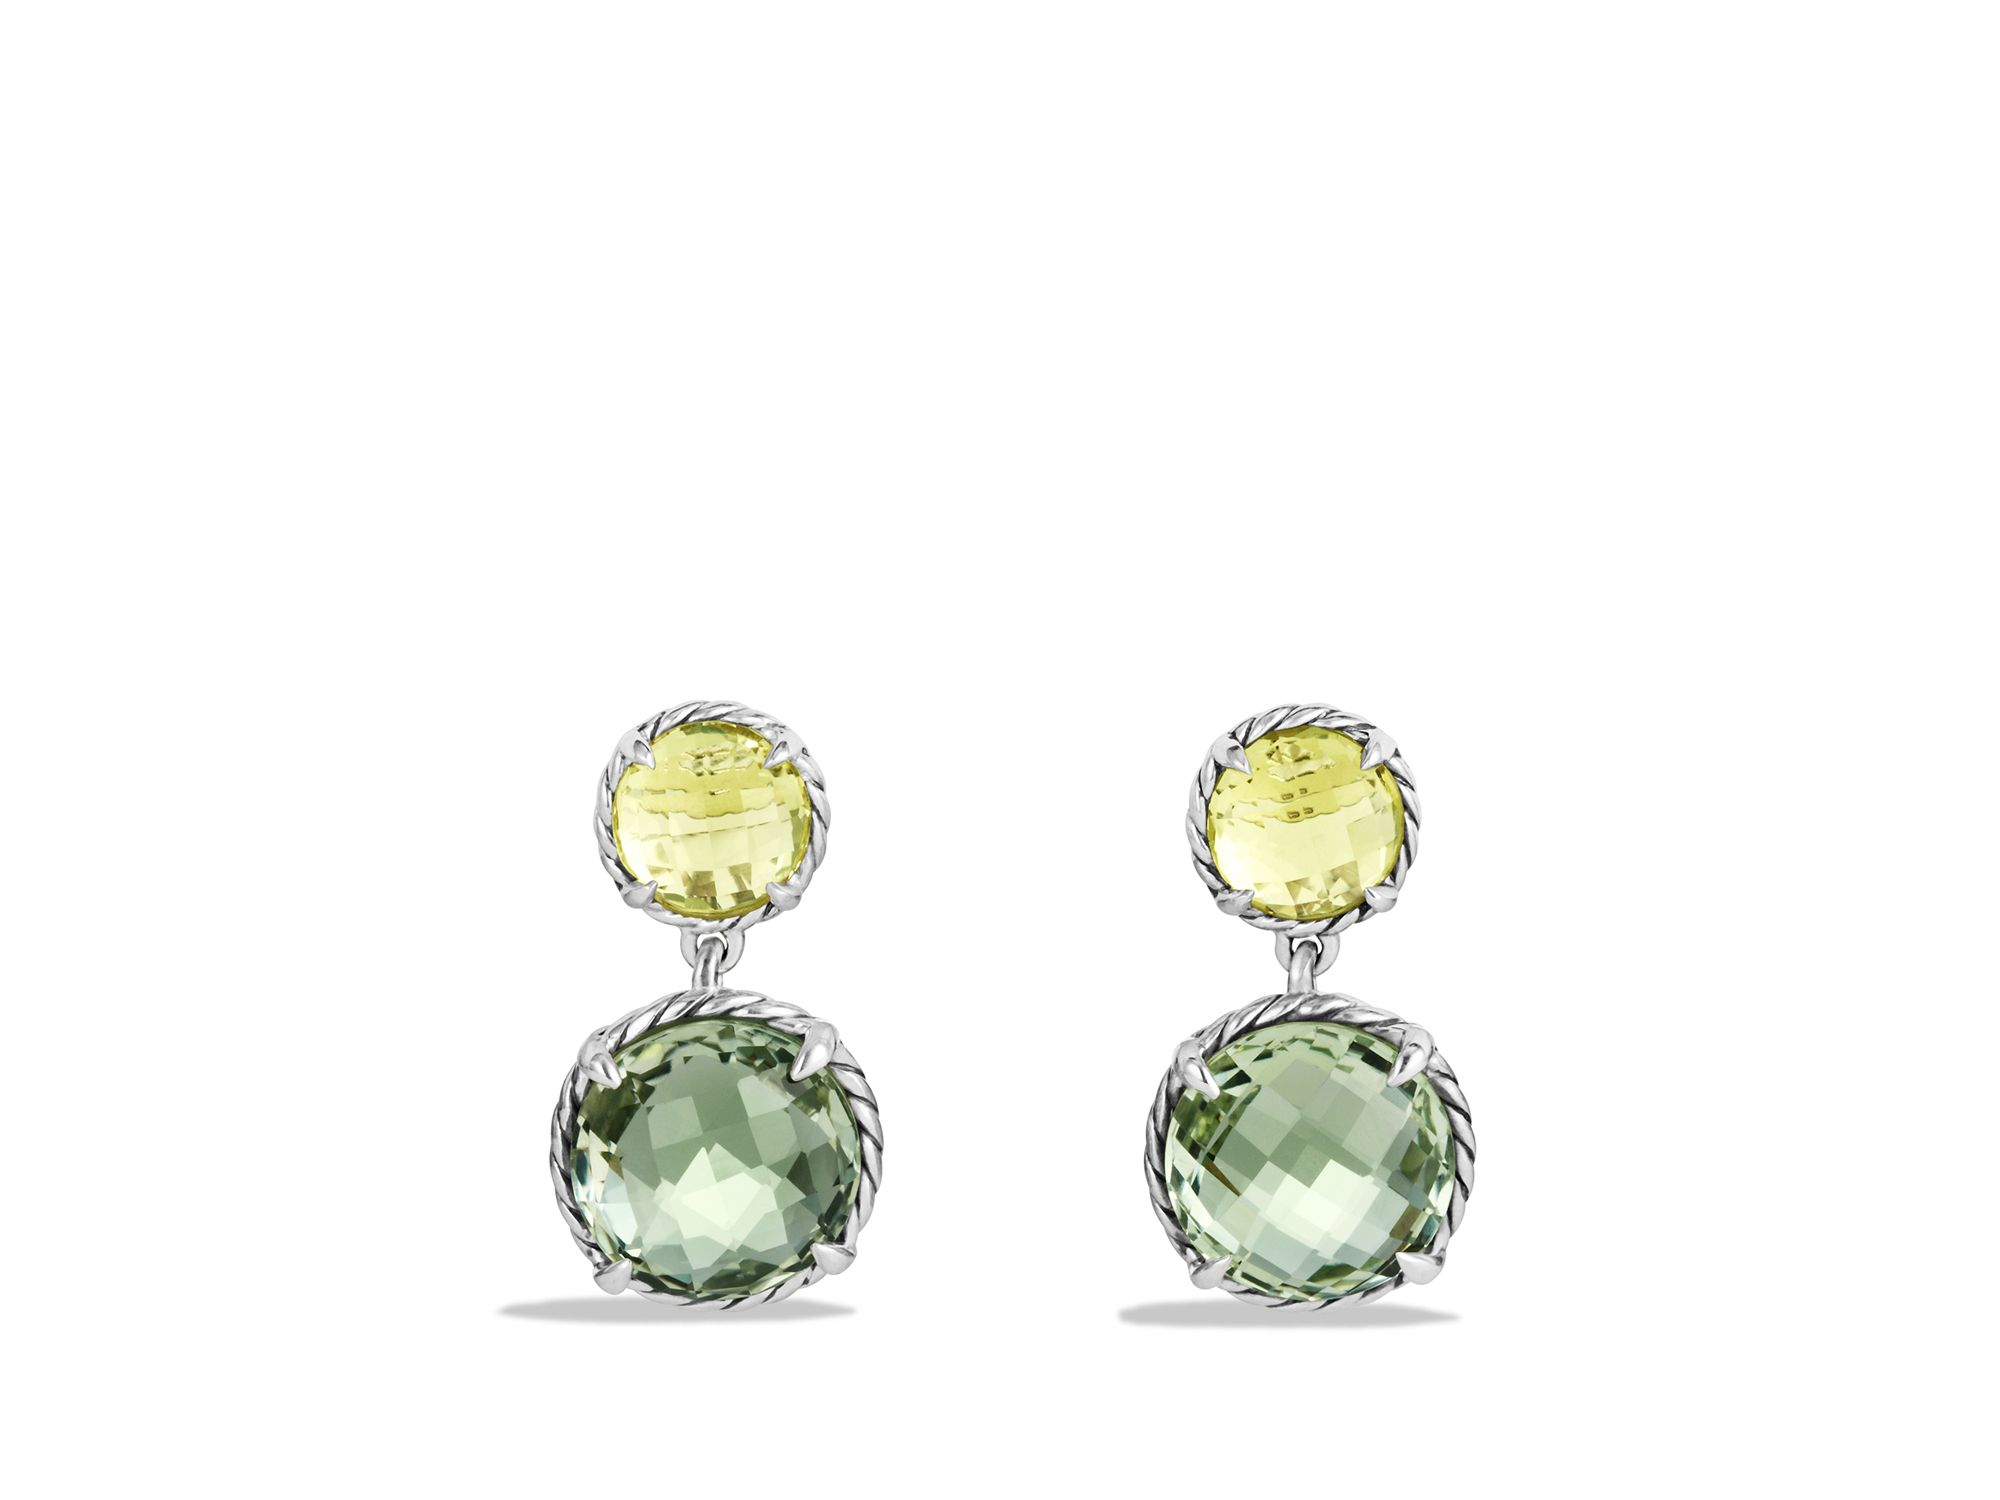 David Yurman Chatelaine Double-drop Earrings With Prasiolite And Lemon  Citrine in Green | Lyst